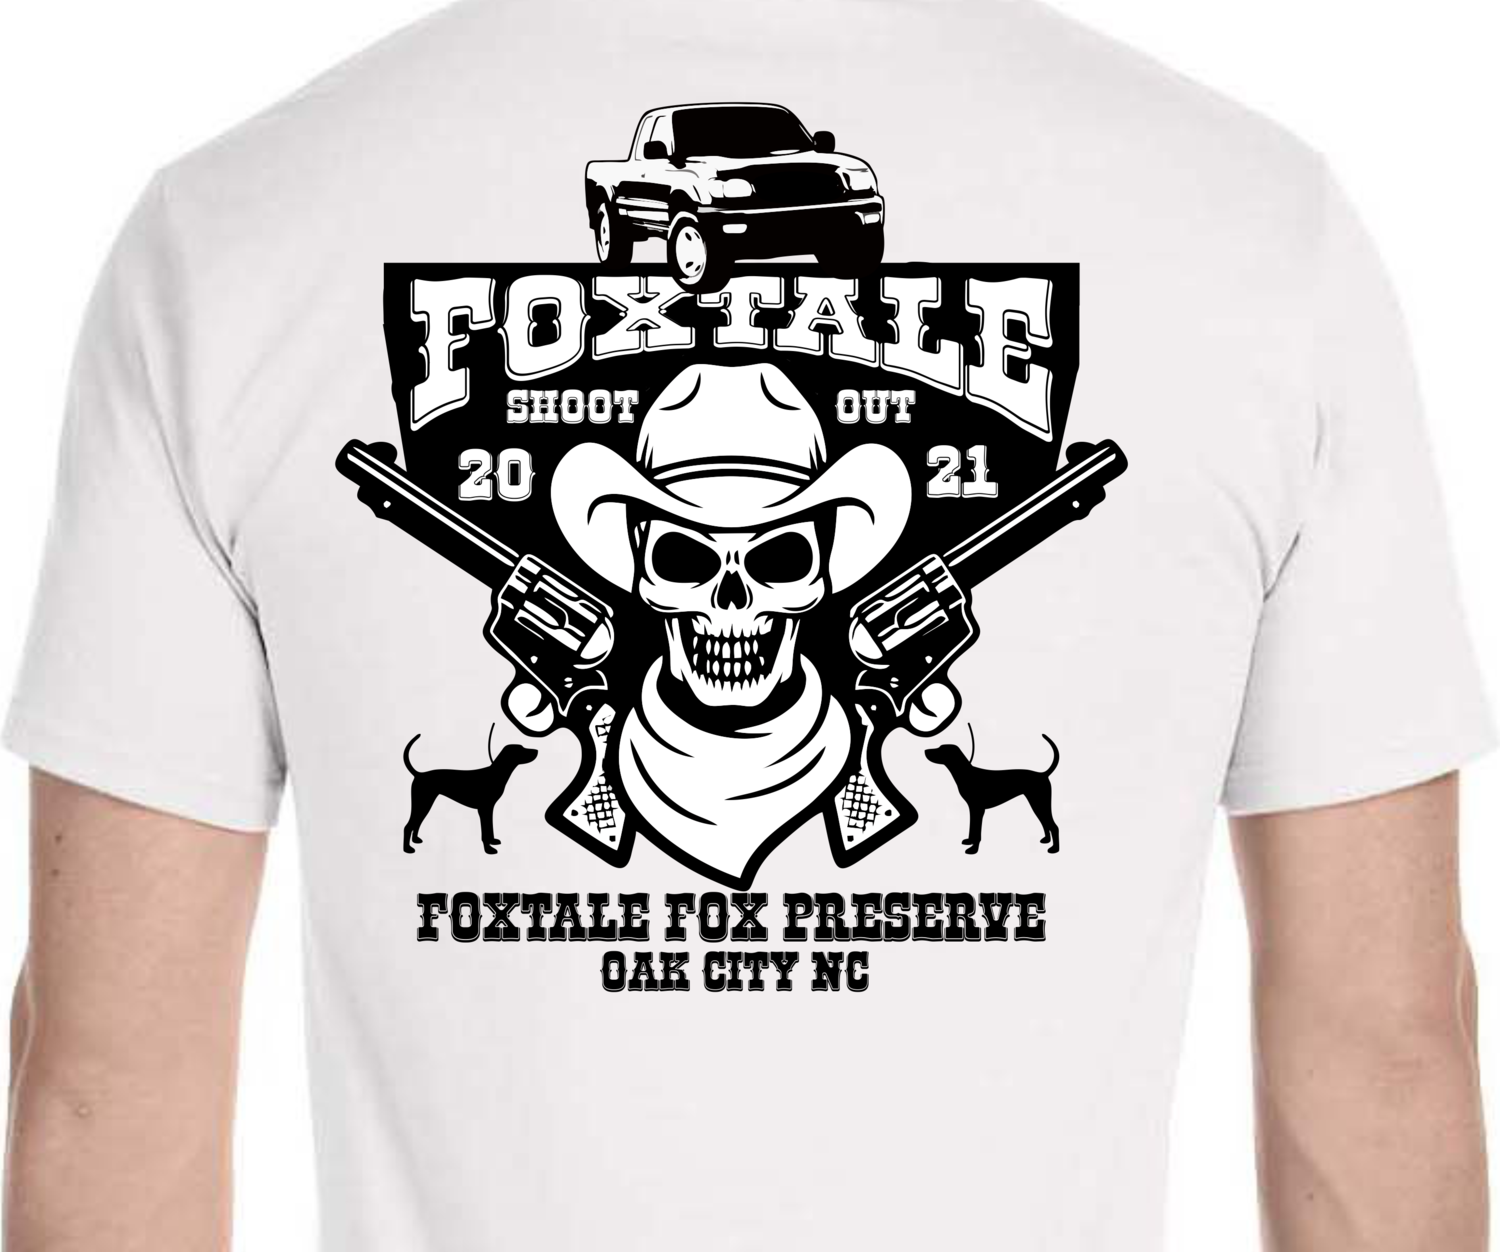 Fox Tale Shootout - Short Sleeve Cotton T-Shirt - Youth and Adult Sizes